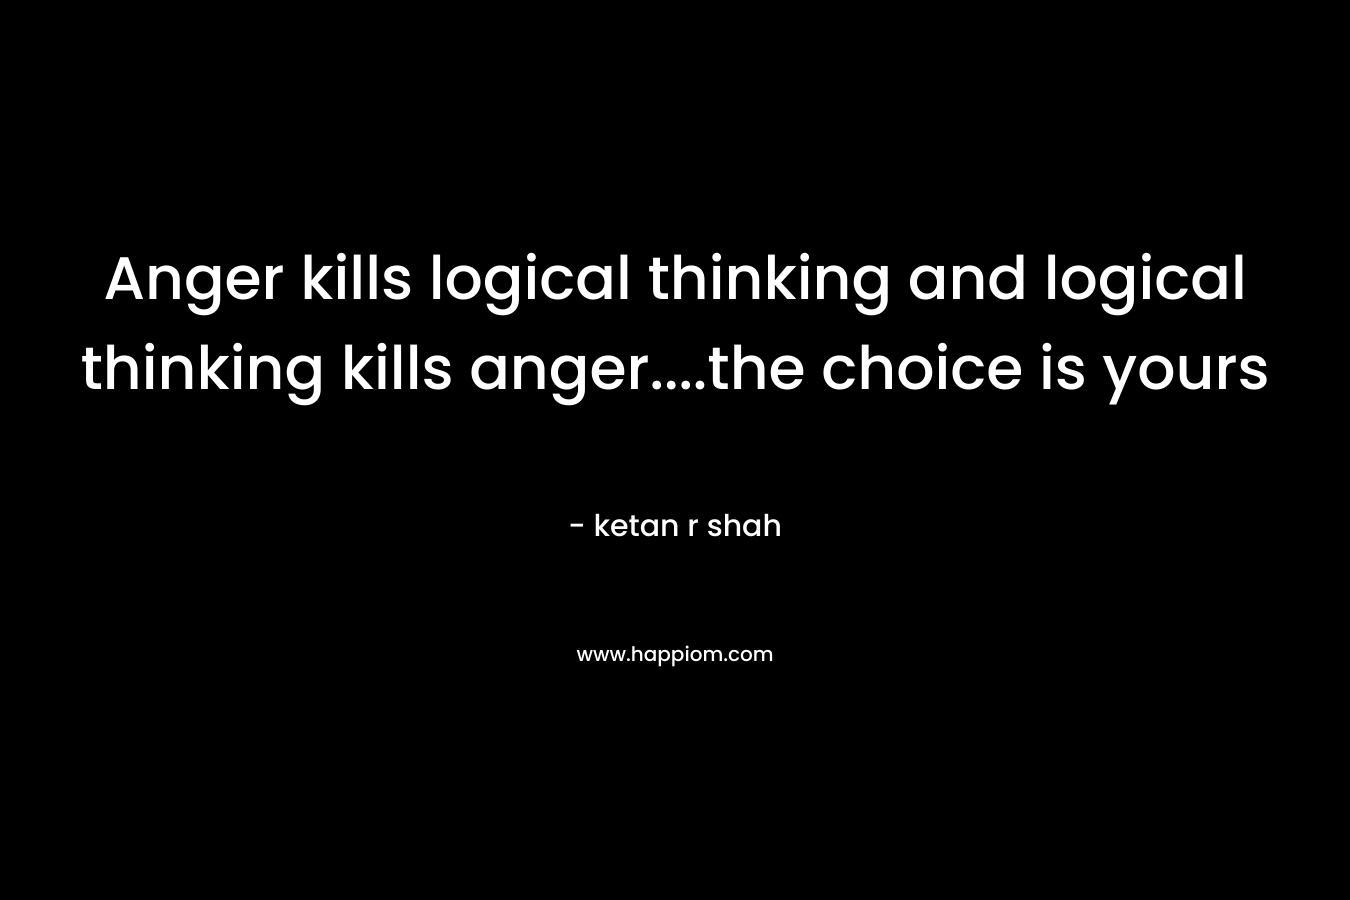 Anger kills logical thinking and logical thinking kills anger....the choice is yours